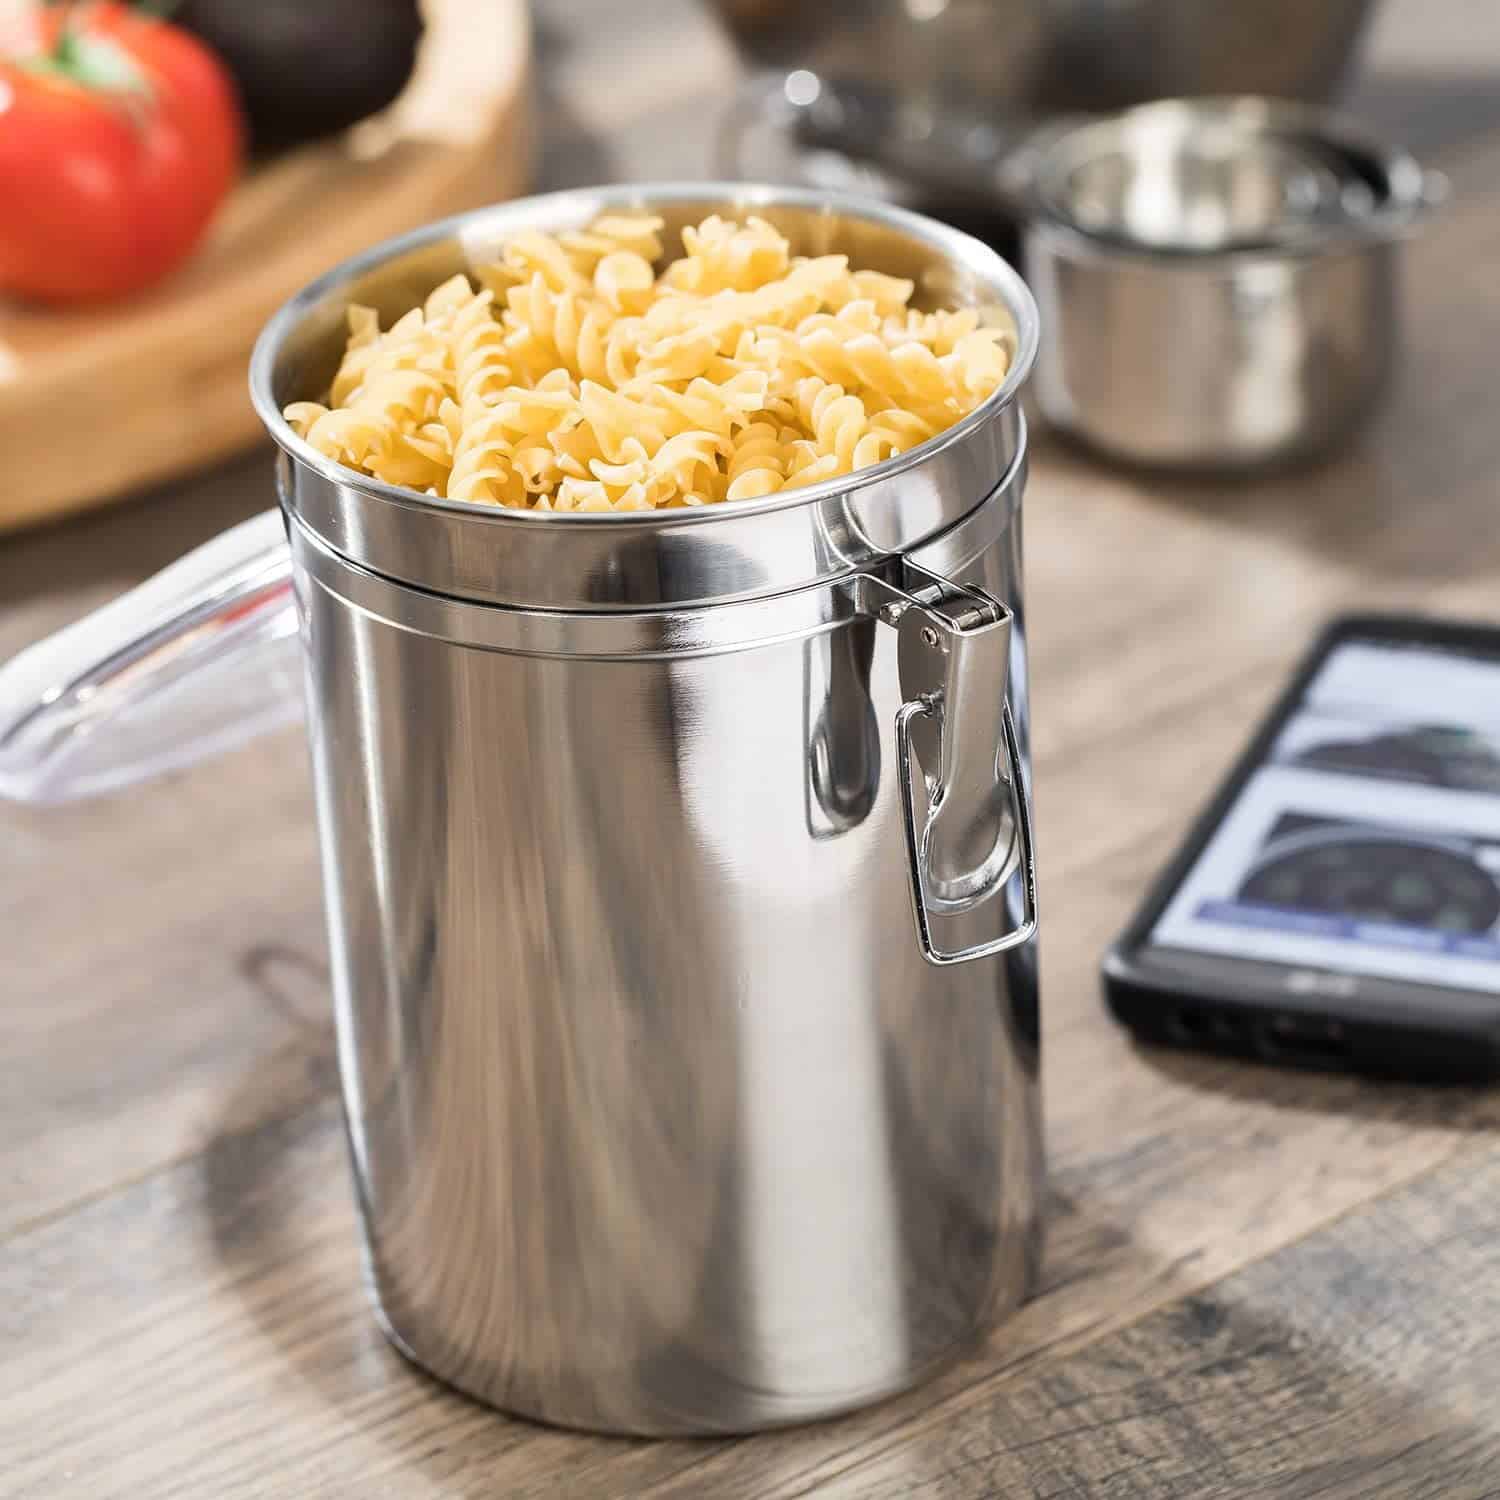 Stainless Steel Canisters for the Kitchen - Beautiful Airtight for Kitchen Counter, Medium 64 fl oz, Food Storage Container, Tea Coffee Sugar Flour Canisters by SilverOnyx - Medium